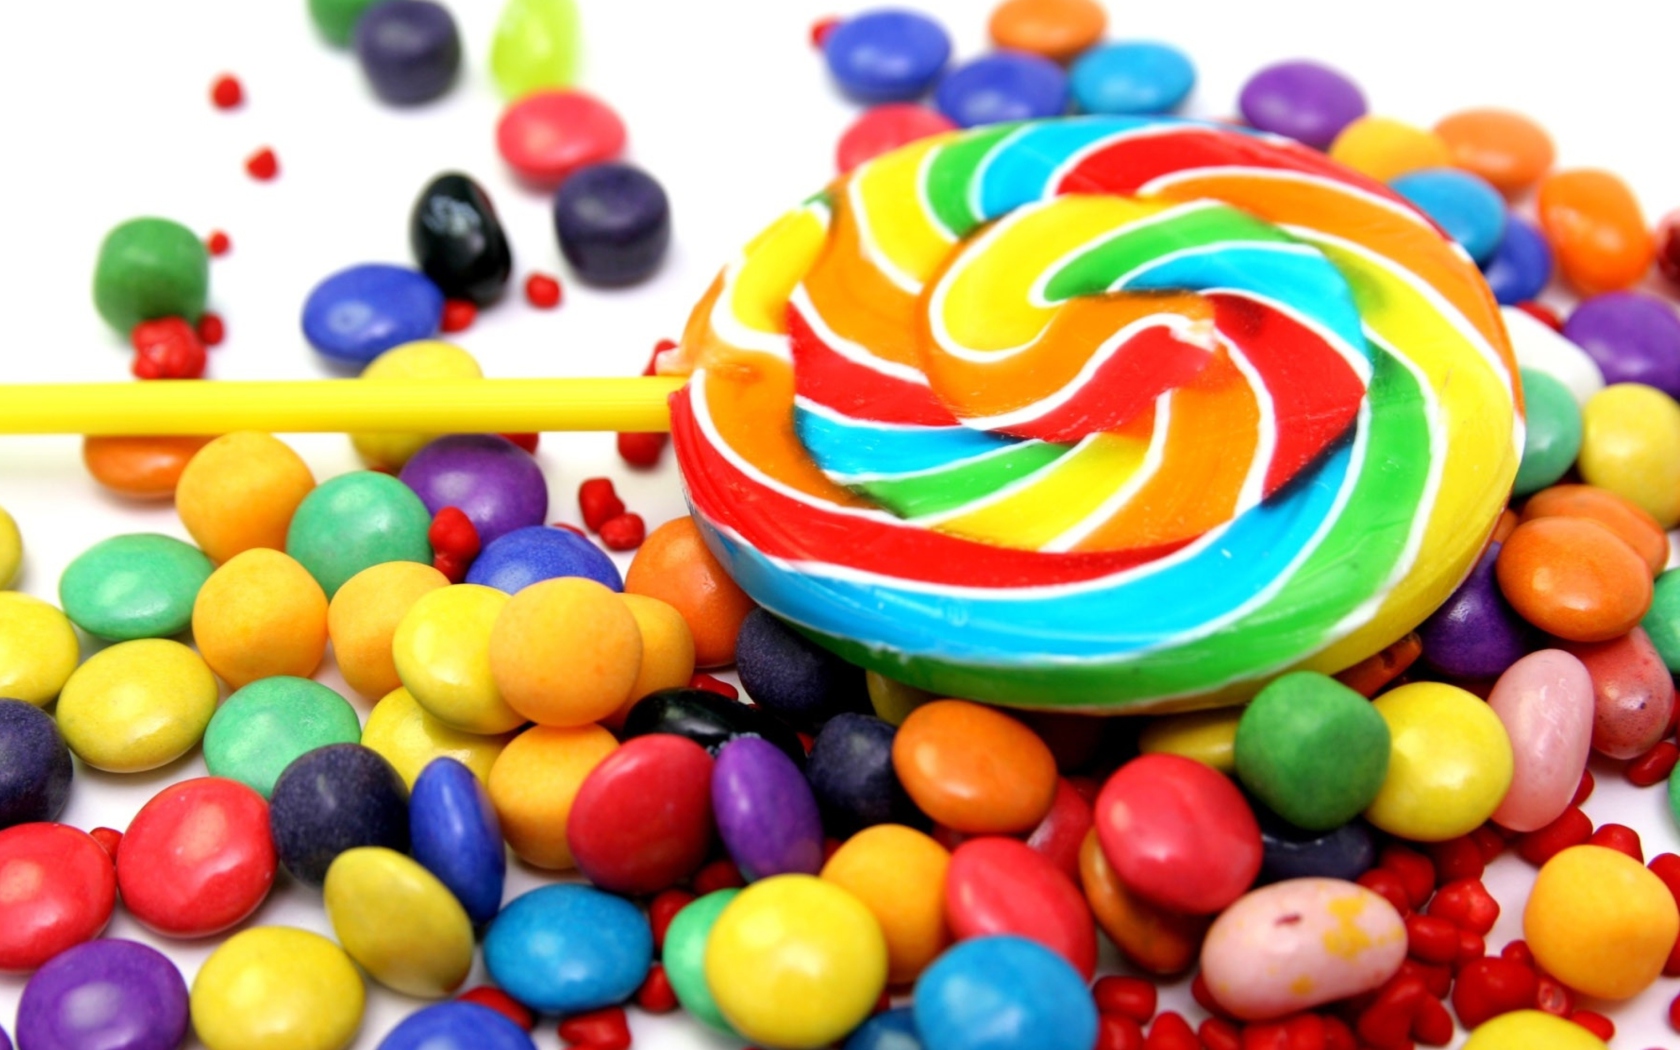 Colorful Candies wallpaper 1680x1050